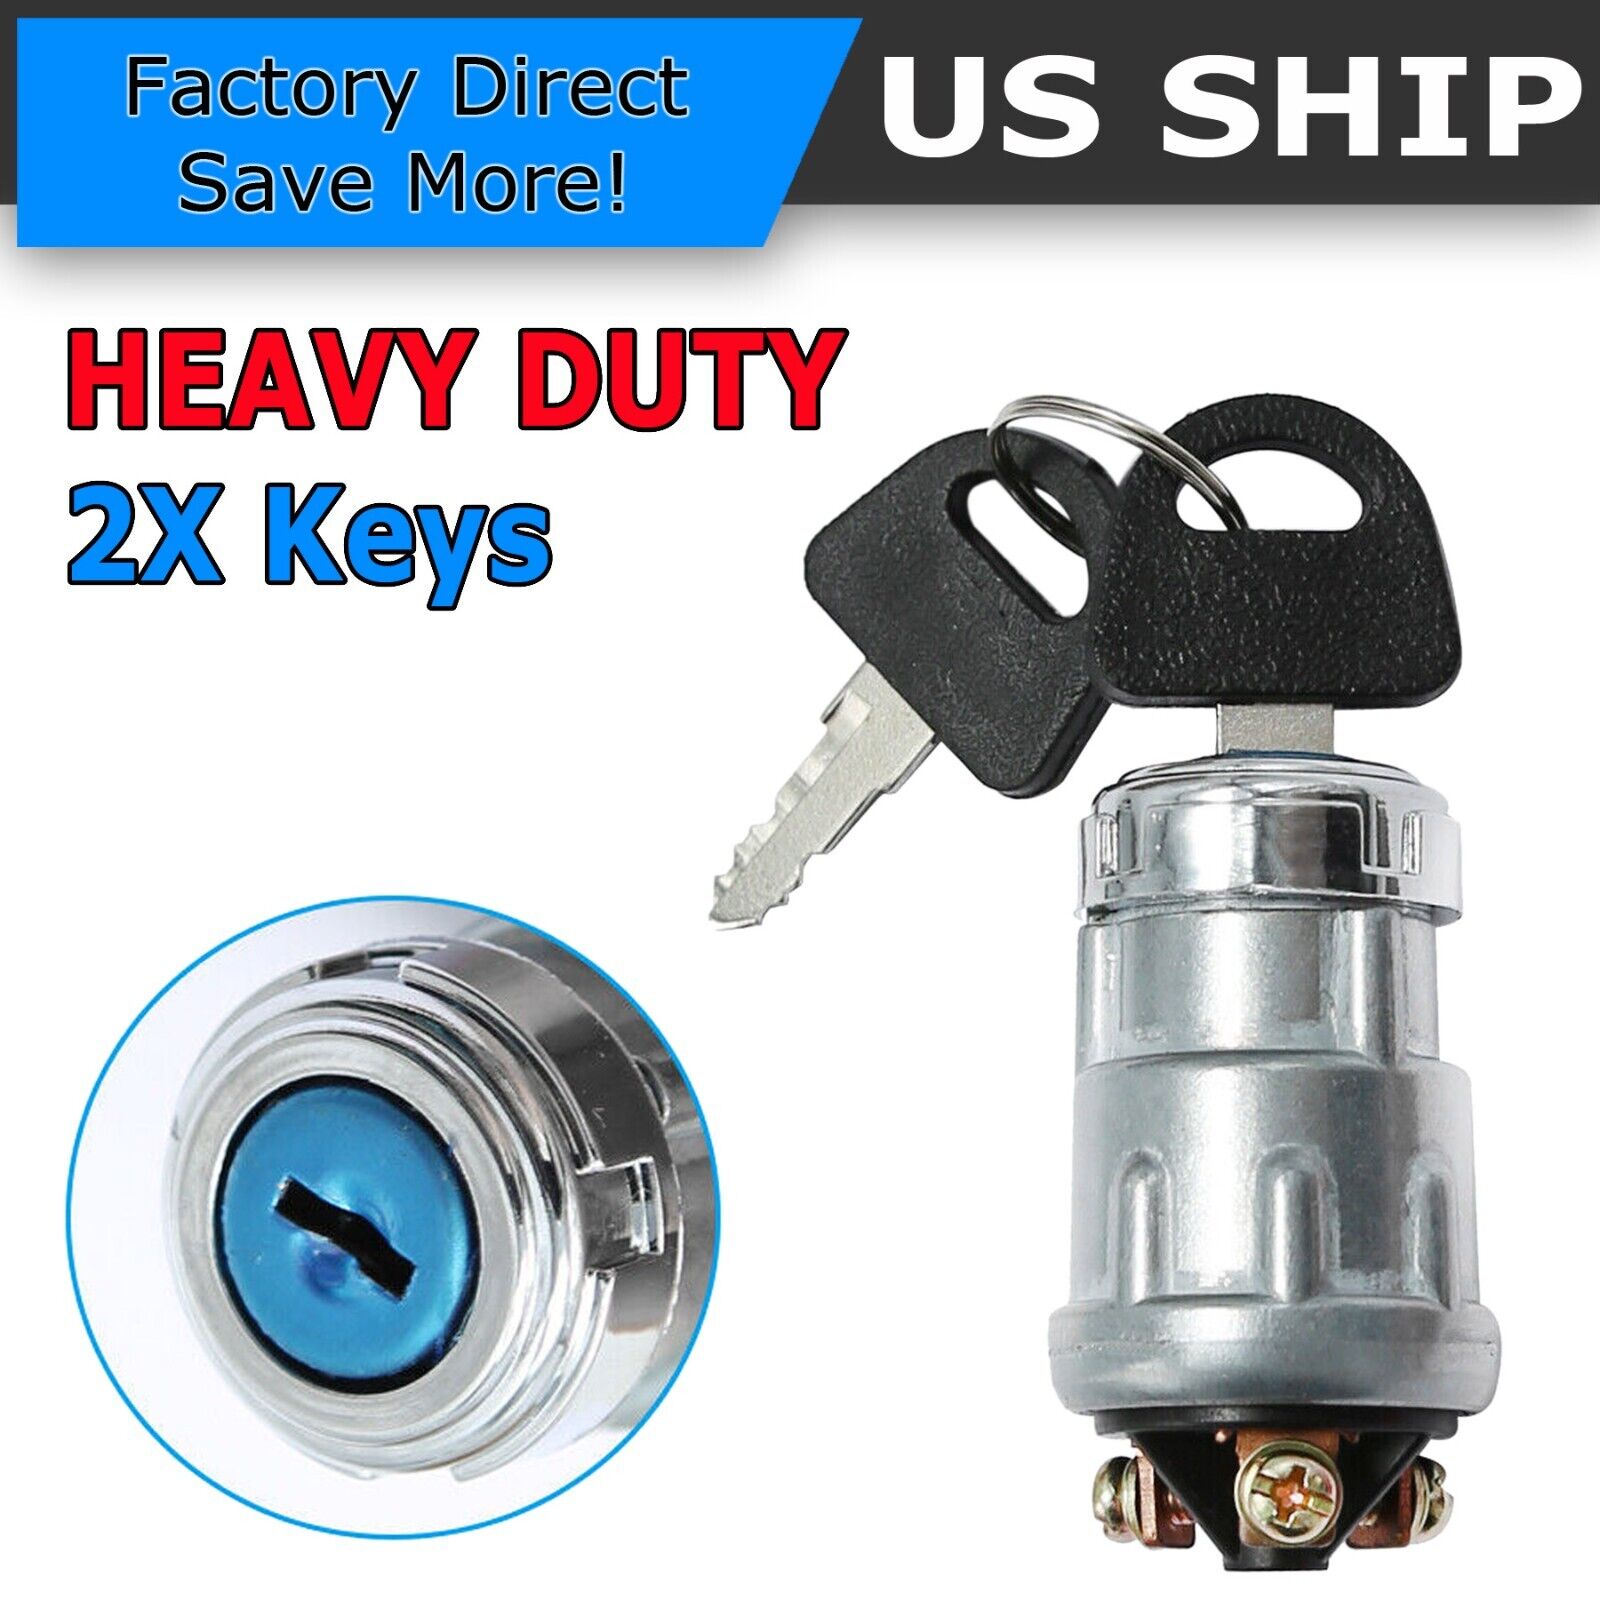 Ignition Key Starter Switch Barrel With 2 Keys For Truck Car Tractor Trailer